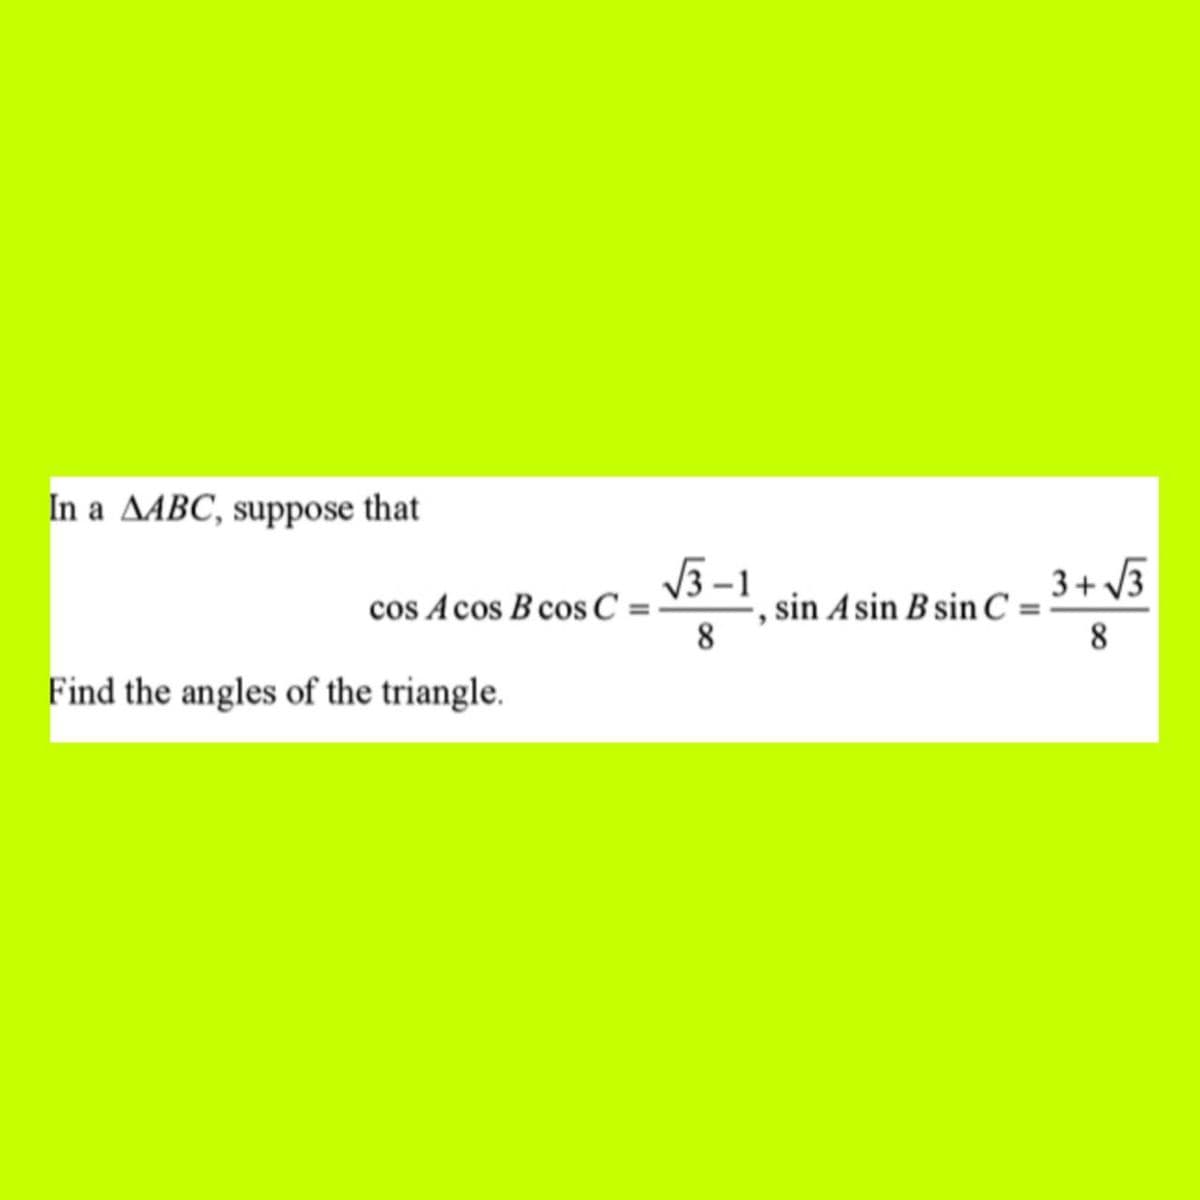 In a AABC, suppose that
Find the angles of the triangle.
cos Acos B cos C =
√√3-1
8
sin Asin B sin C
3+√3
8